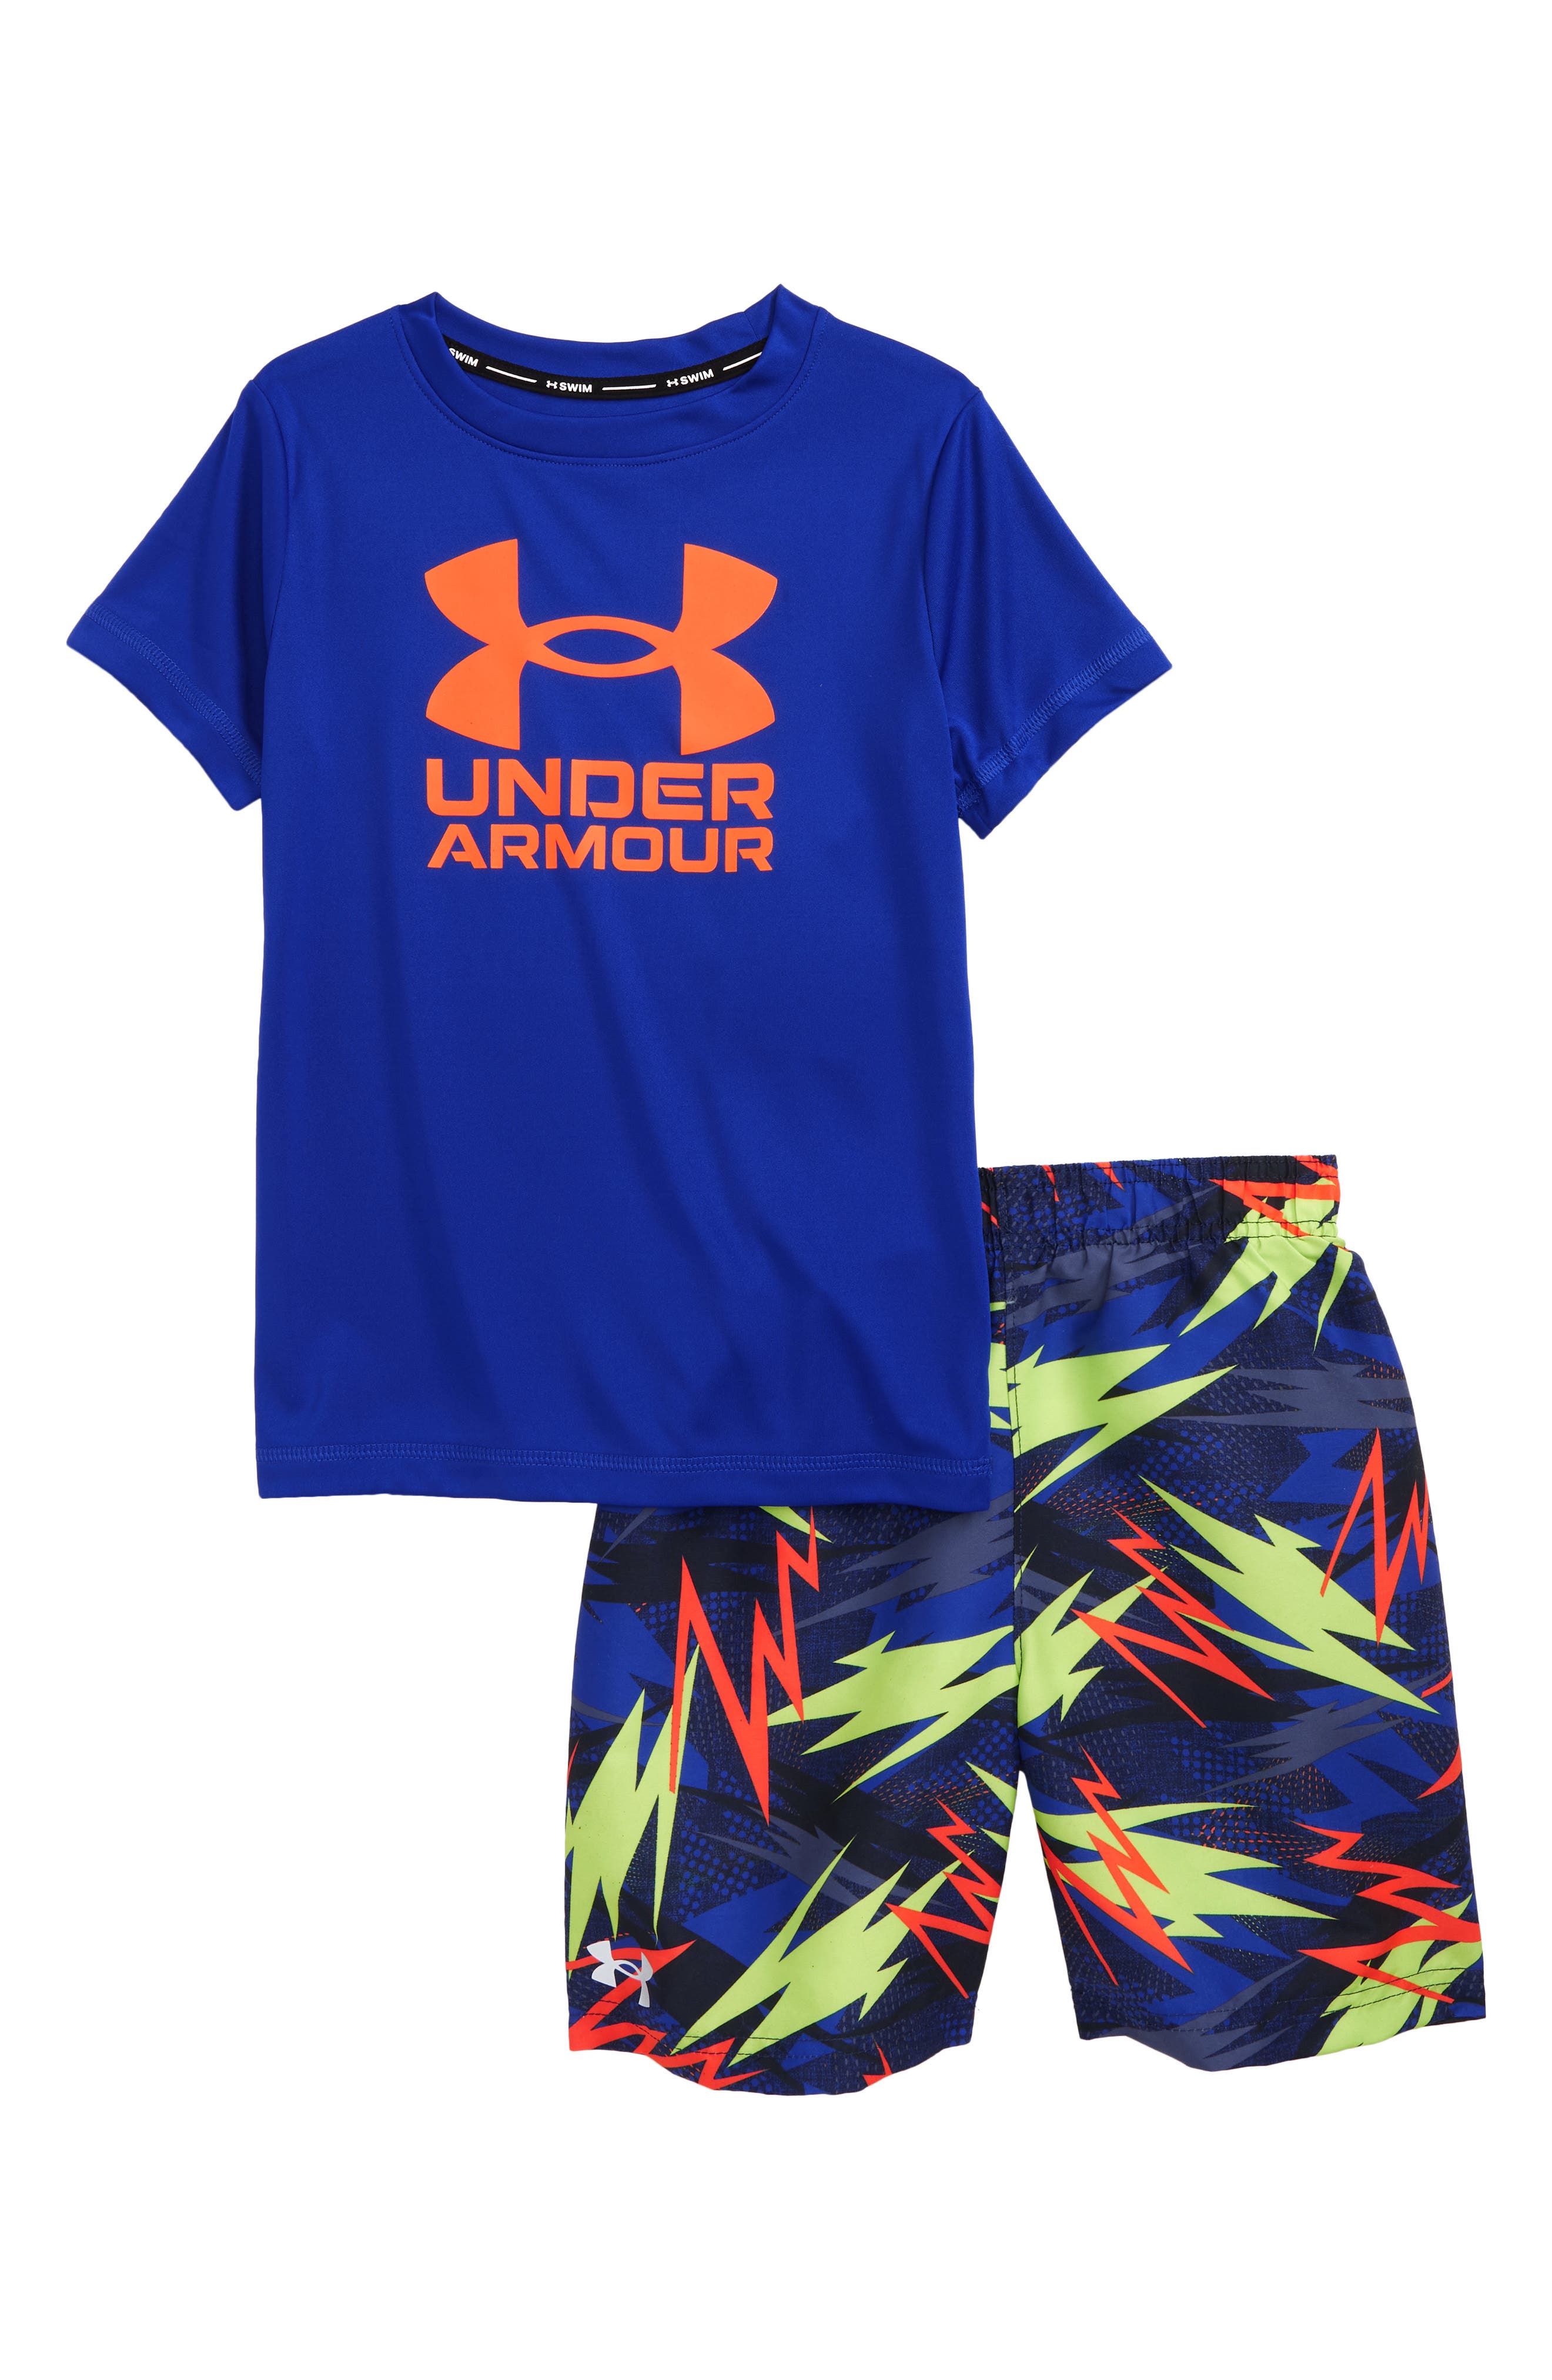 New Under Armour Girls 2-Piece Tank & Shorts Set MSRP $30 and $36 